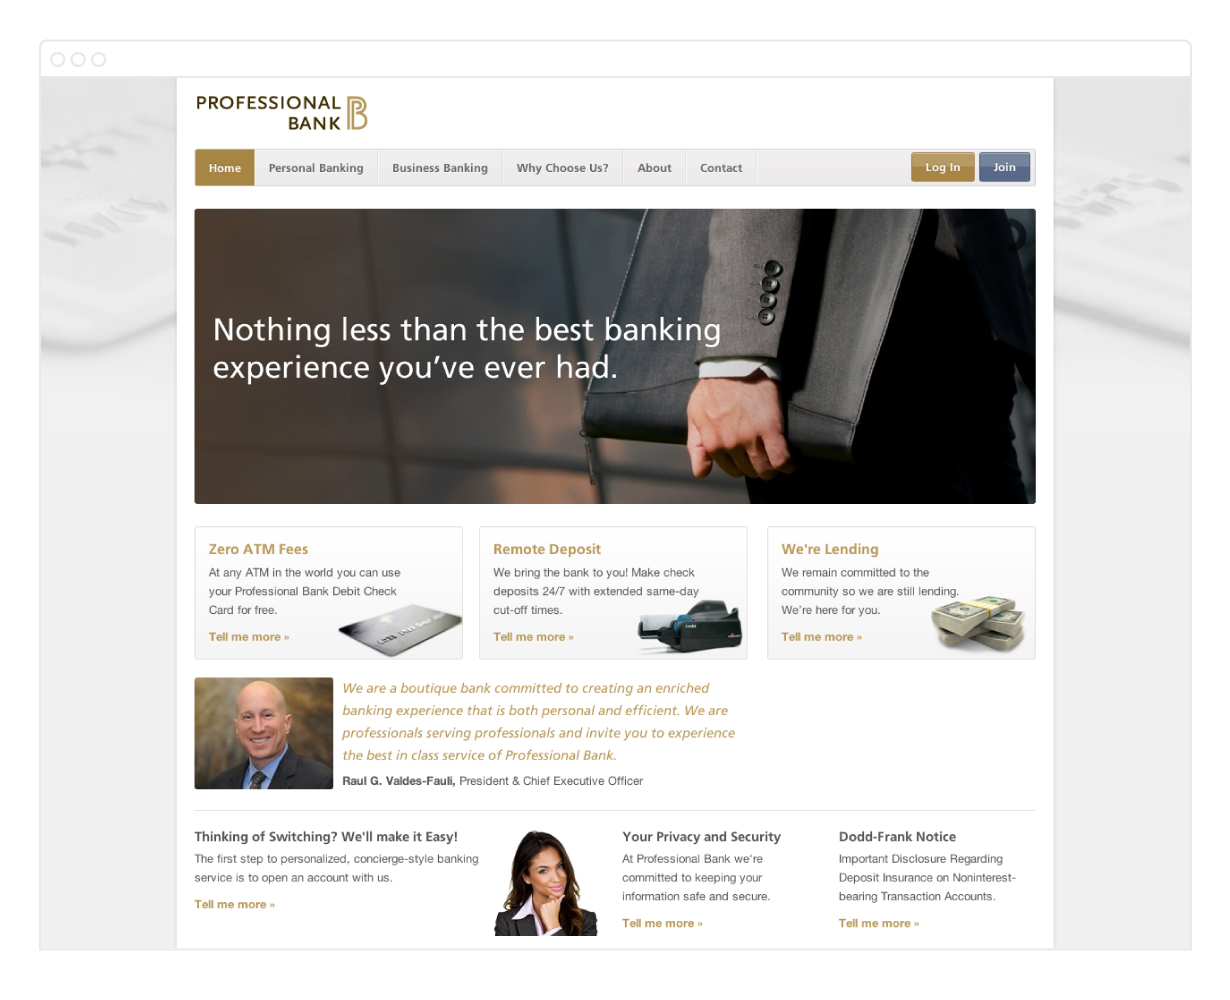 Professional Bank Home Page